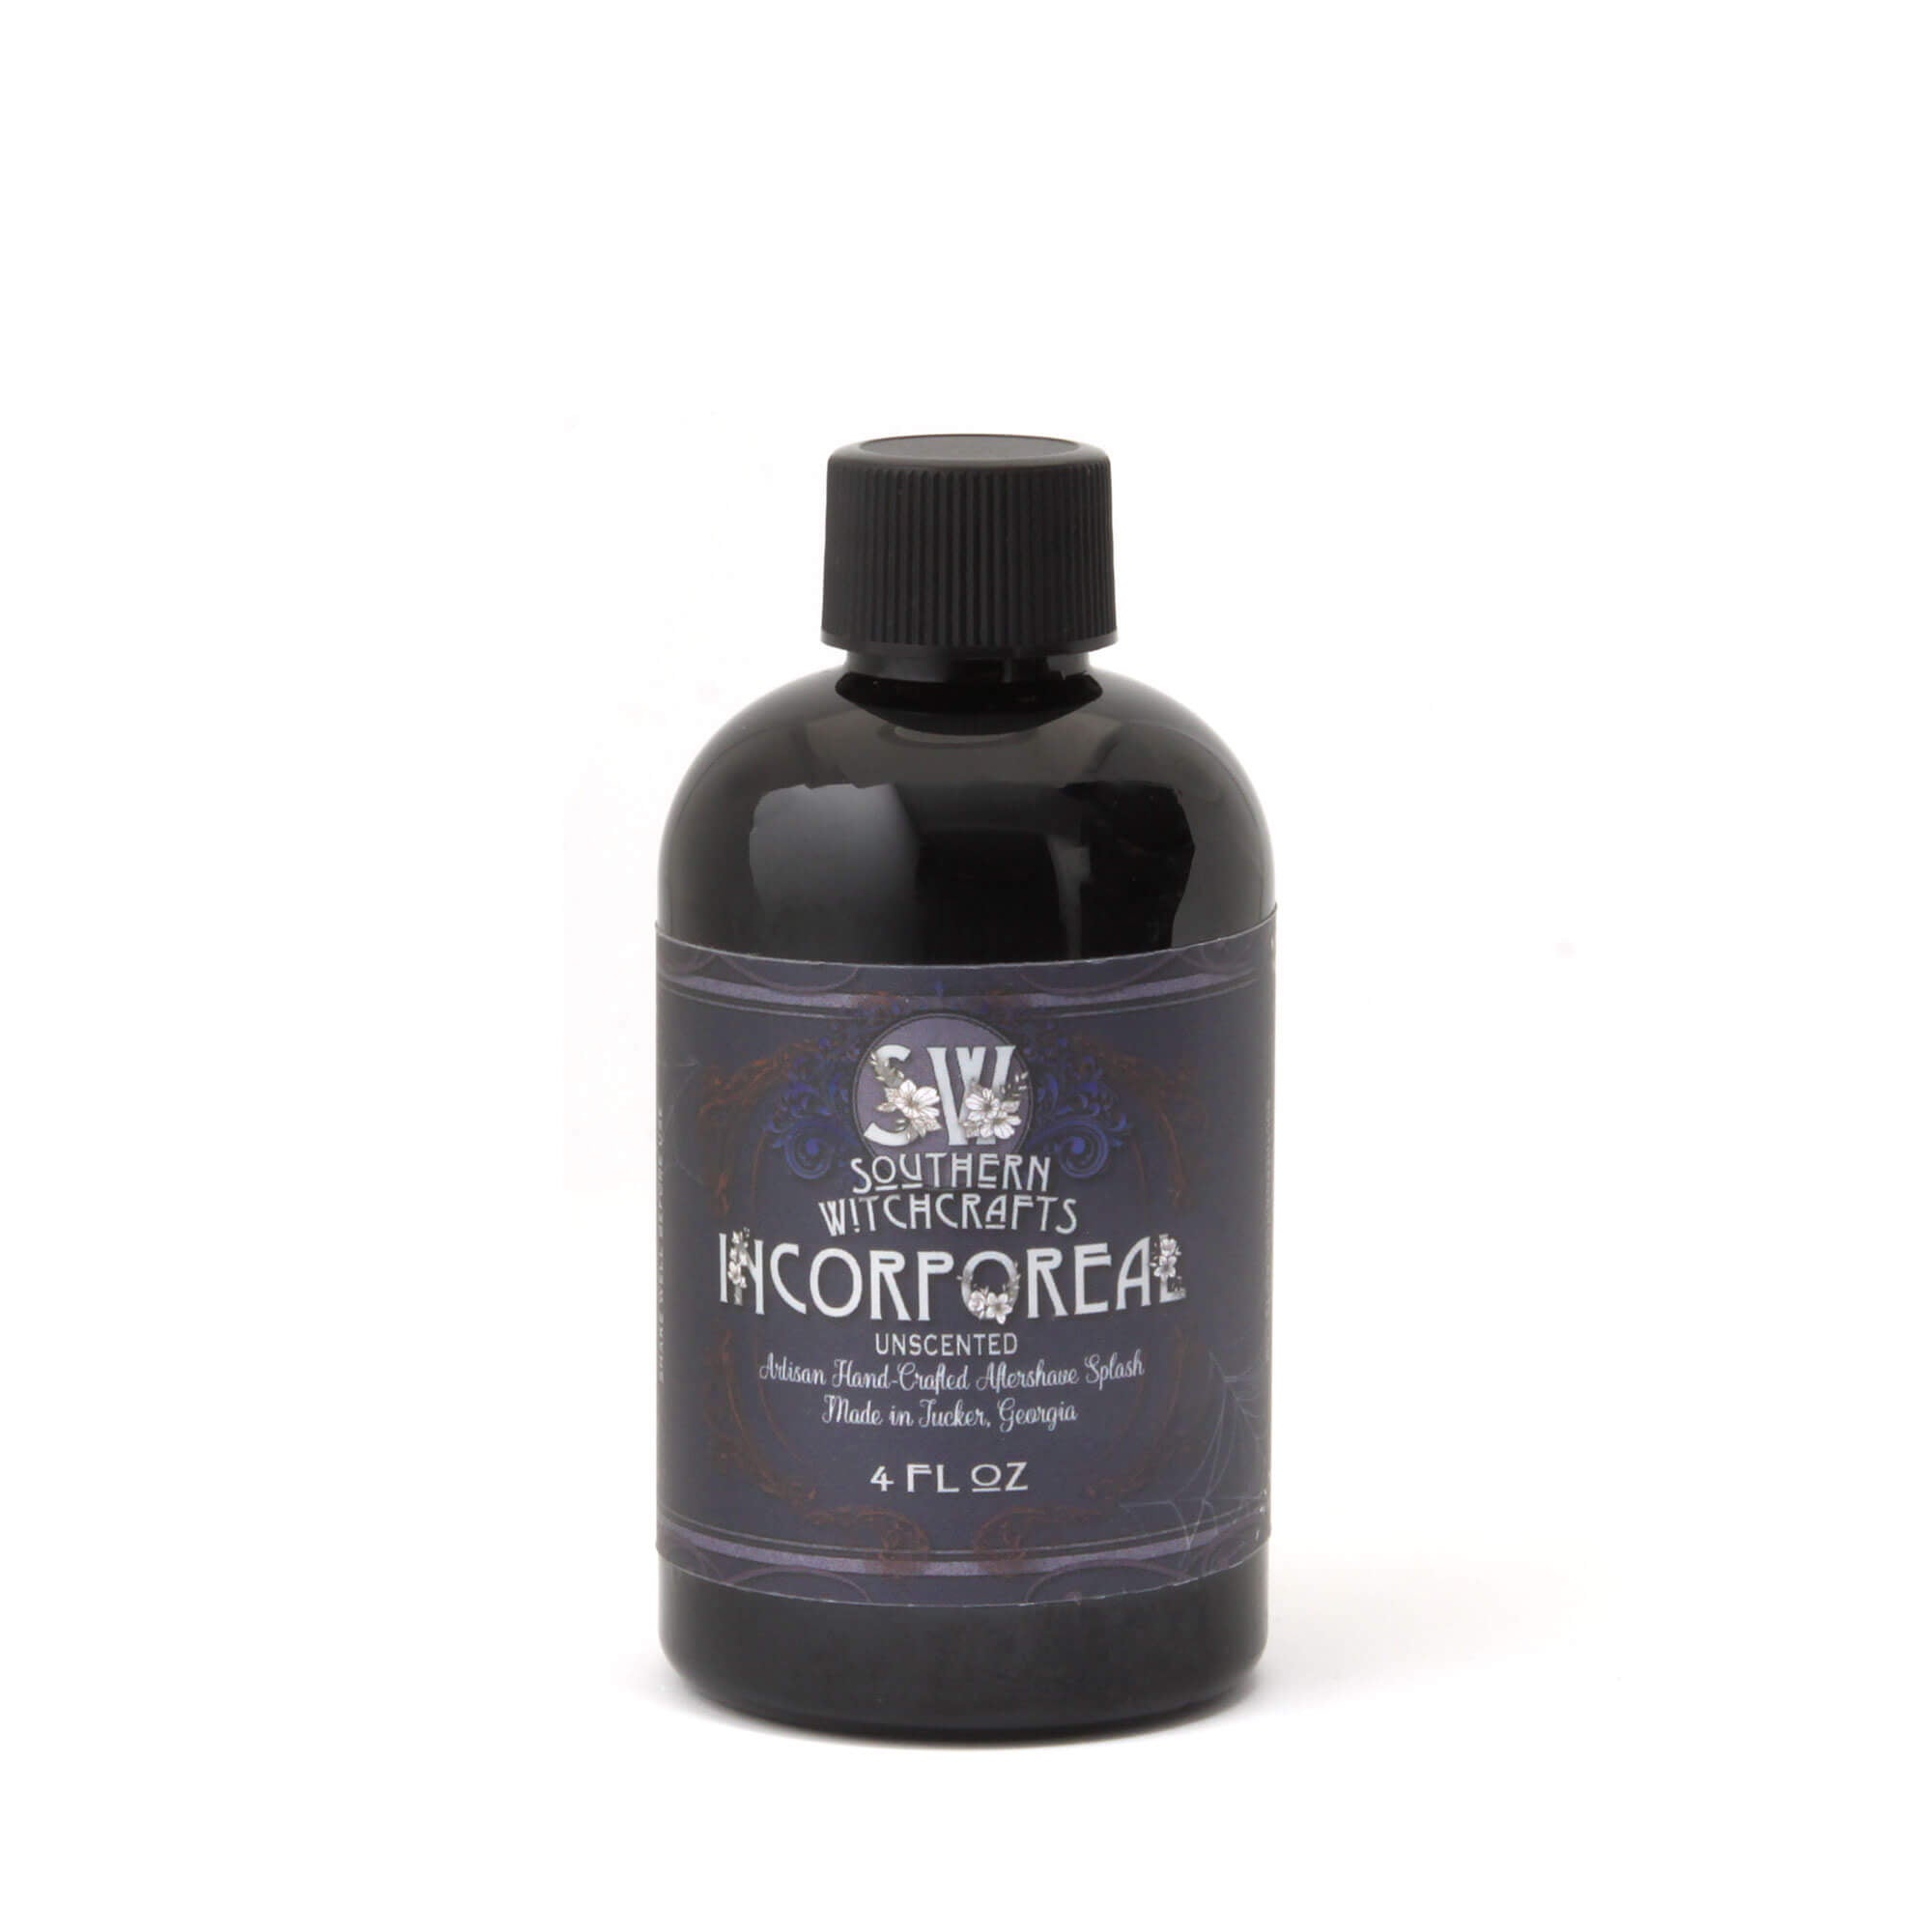 Southern Witchcrafts Incorporeal Aftershave Splash